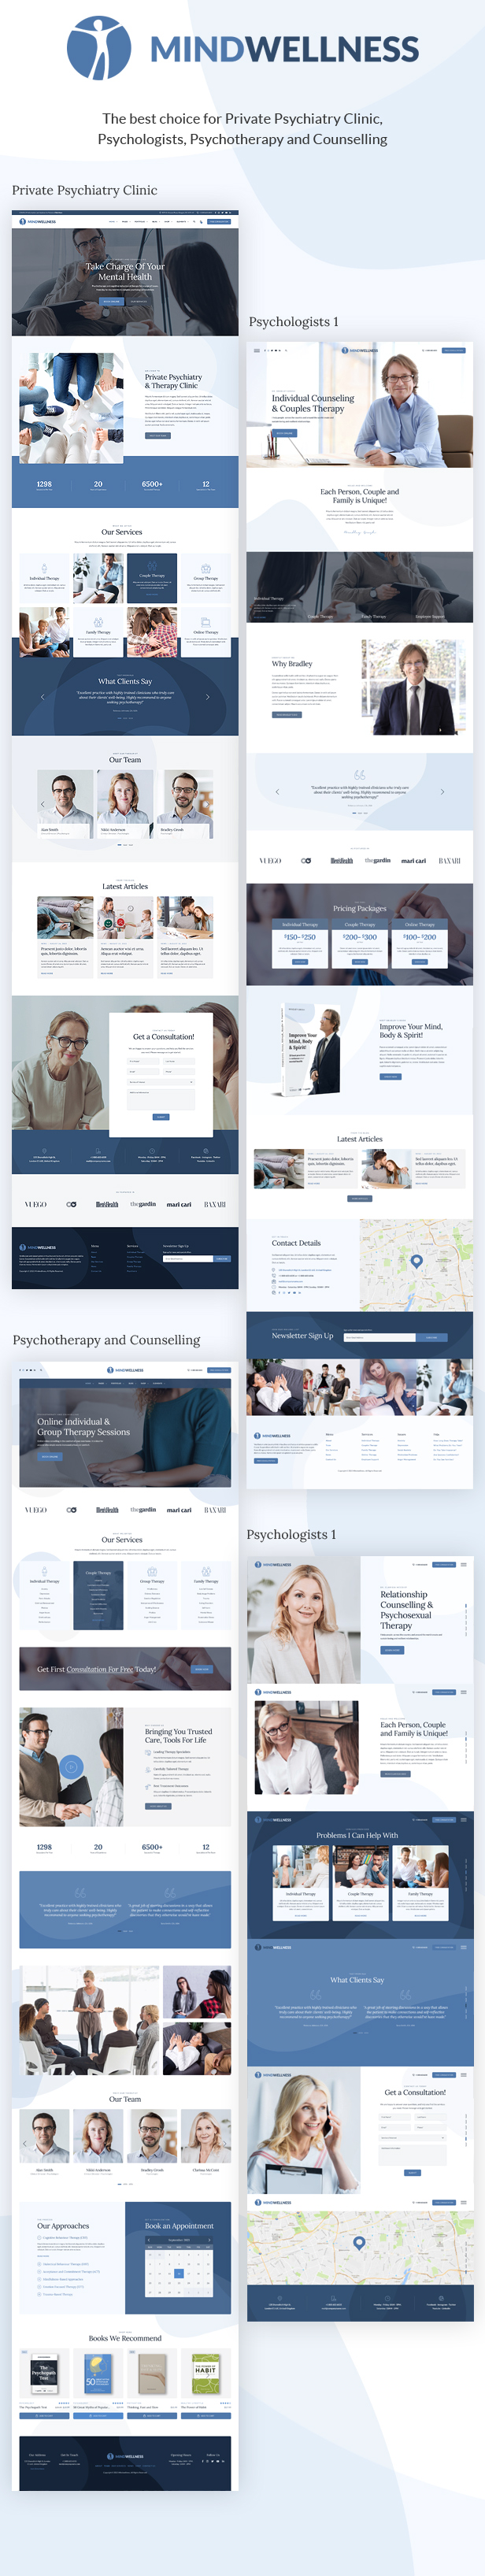 Mindwellness - Private Psychiatry Clinic HTML Website Template - 1